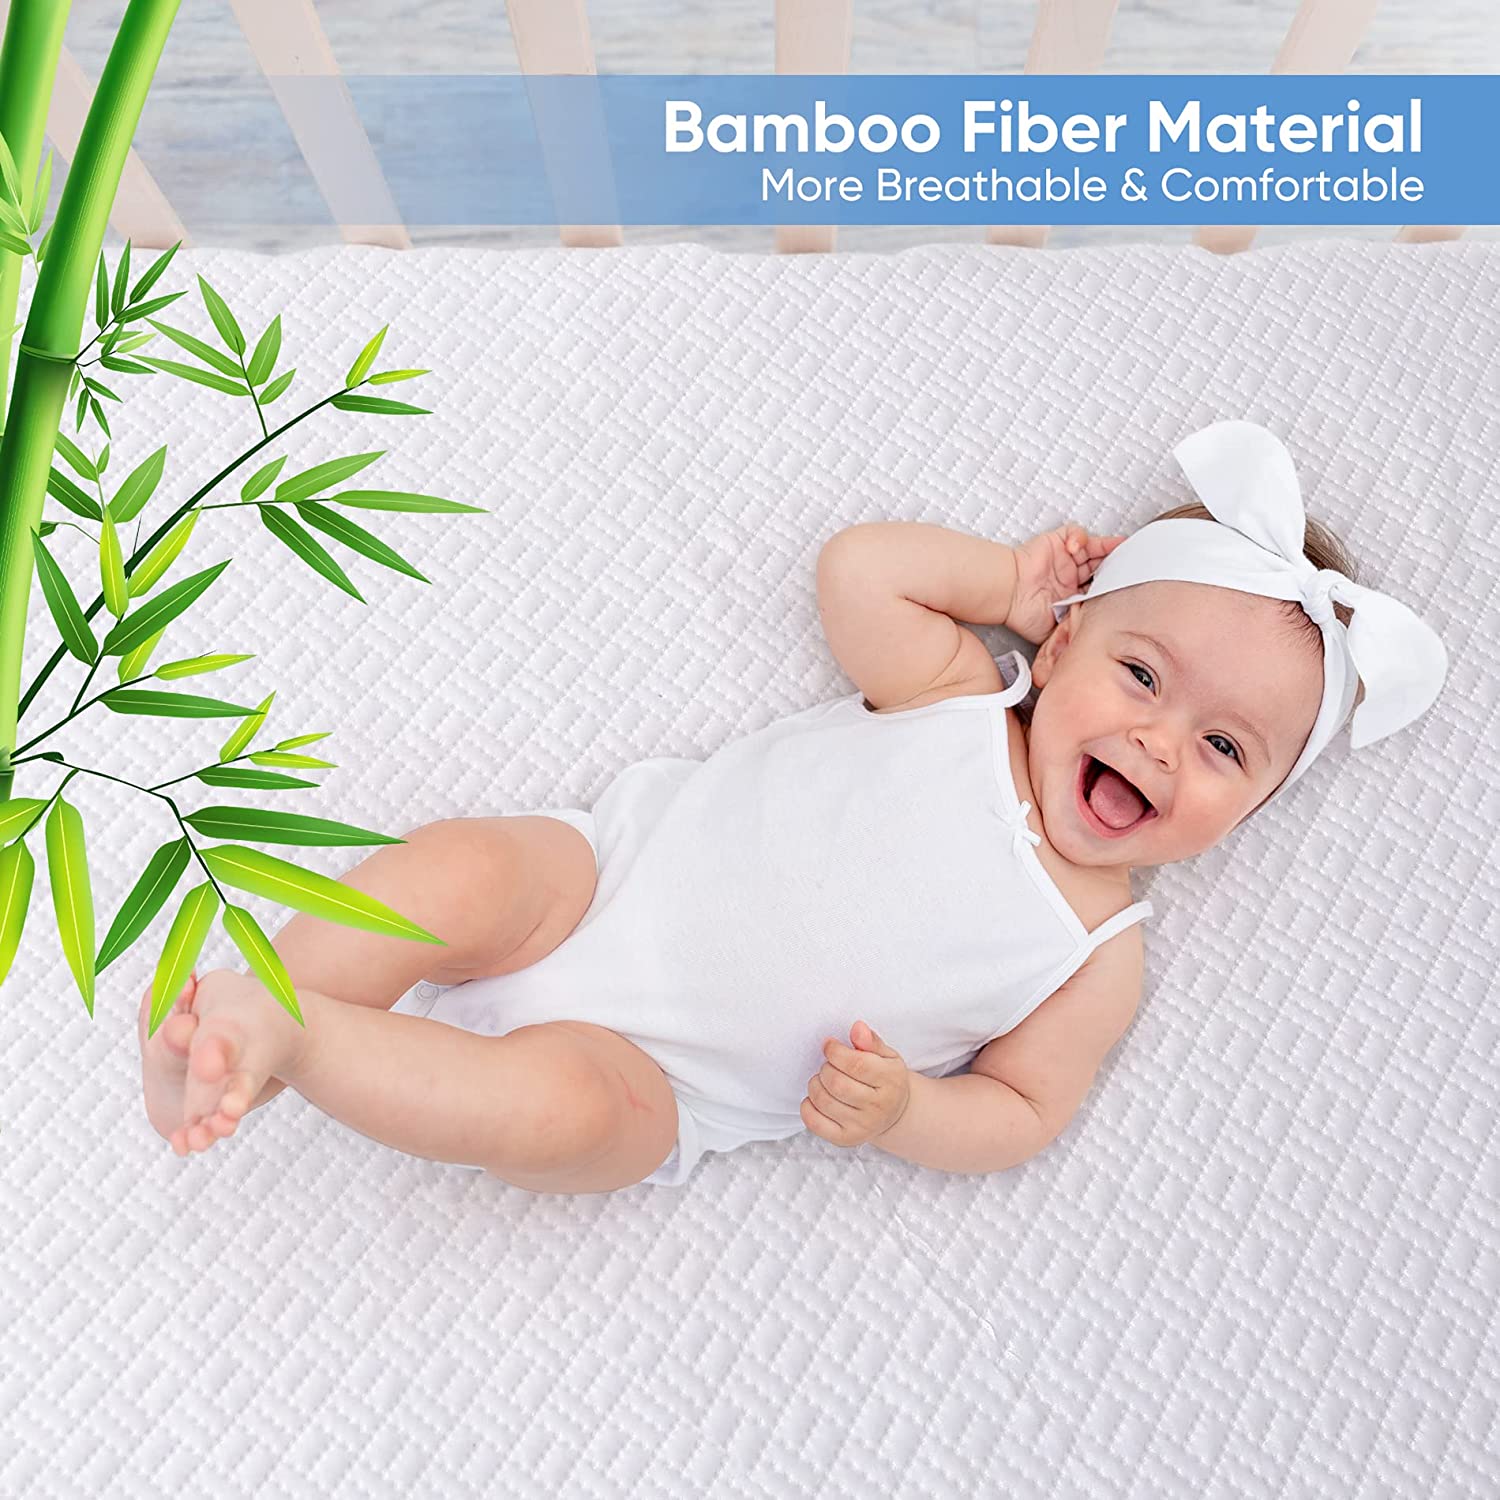 Waterproof Bamboo Mattress Cover - Breathable Soft Protector for Bedding